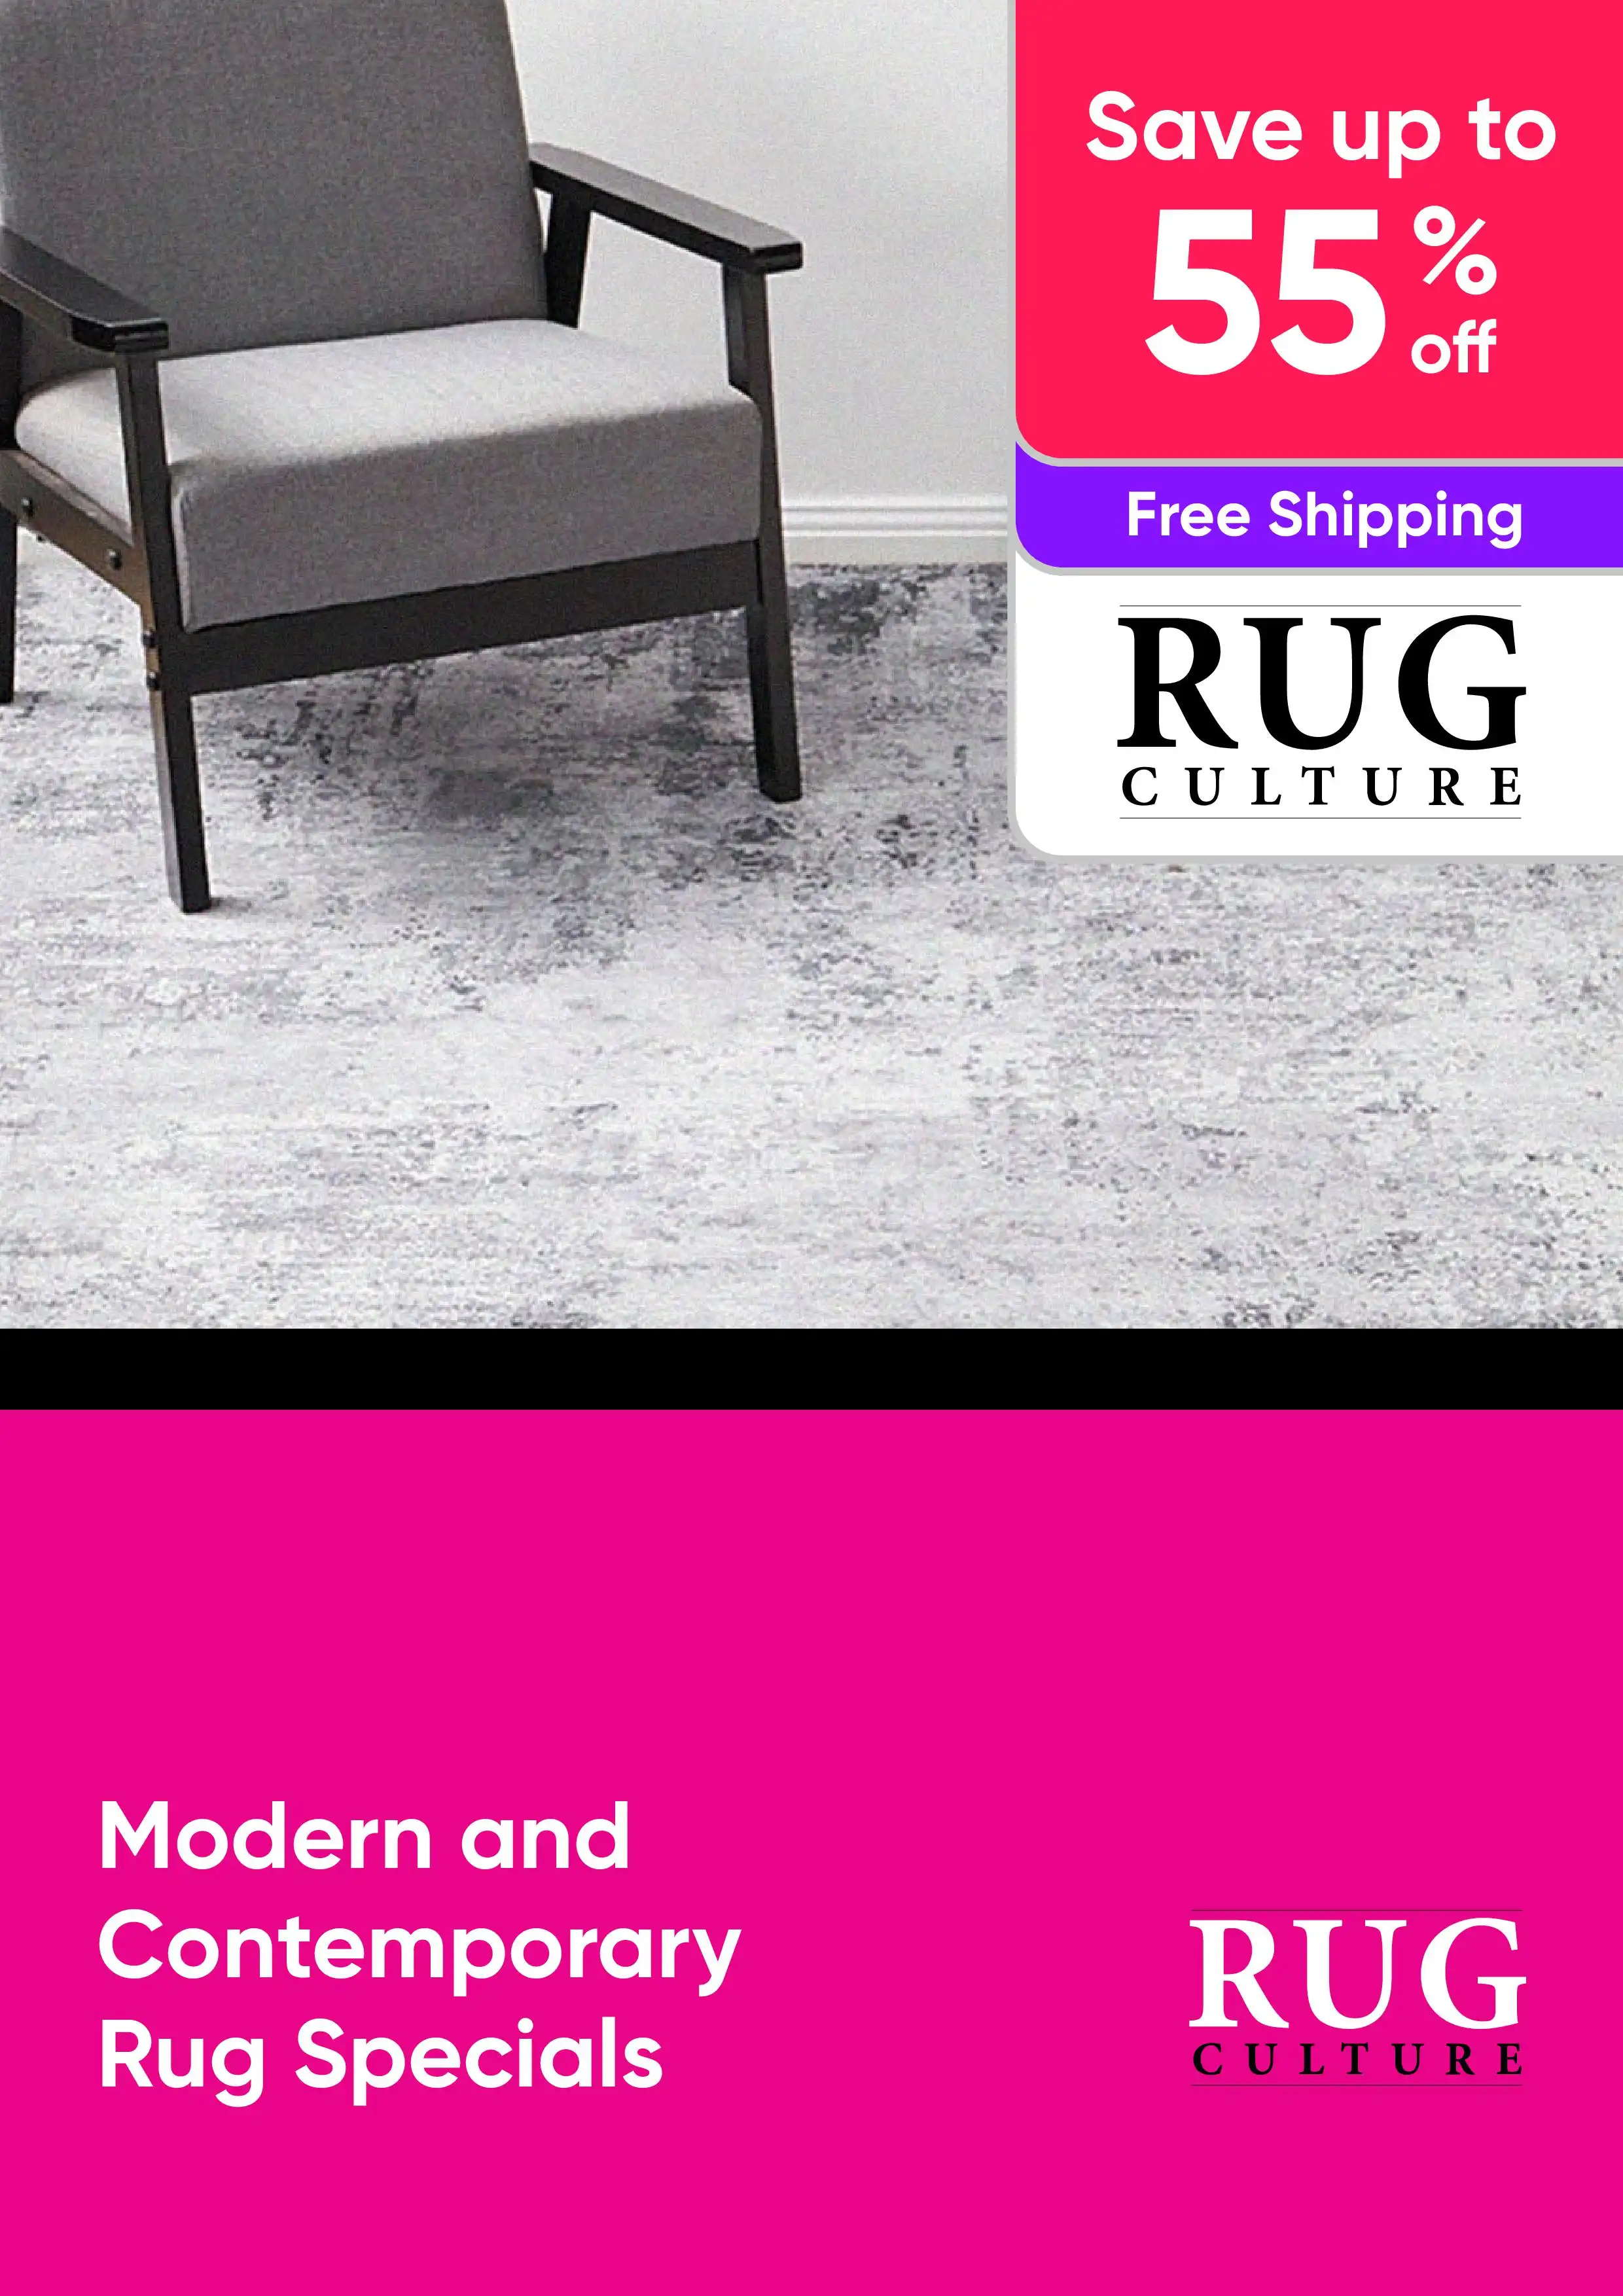 Modern and Contemporary Rug Specials - Up to 55% Off RRP and Free Shipping